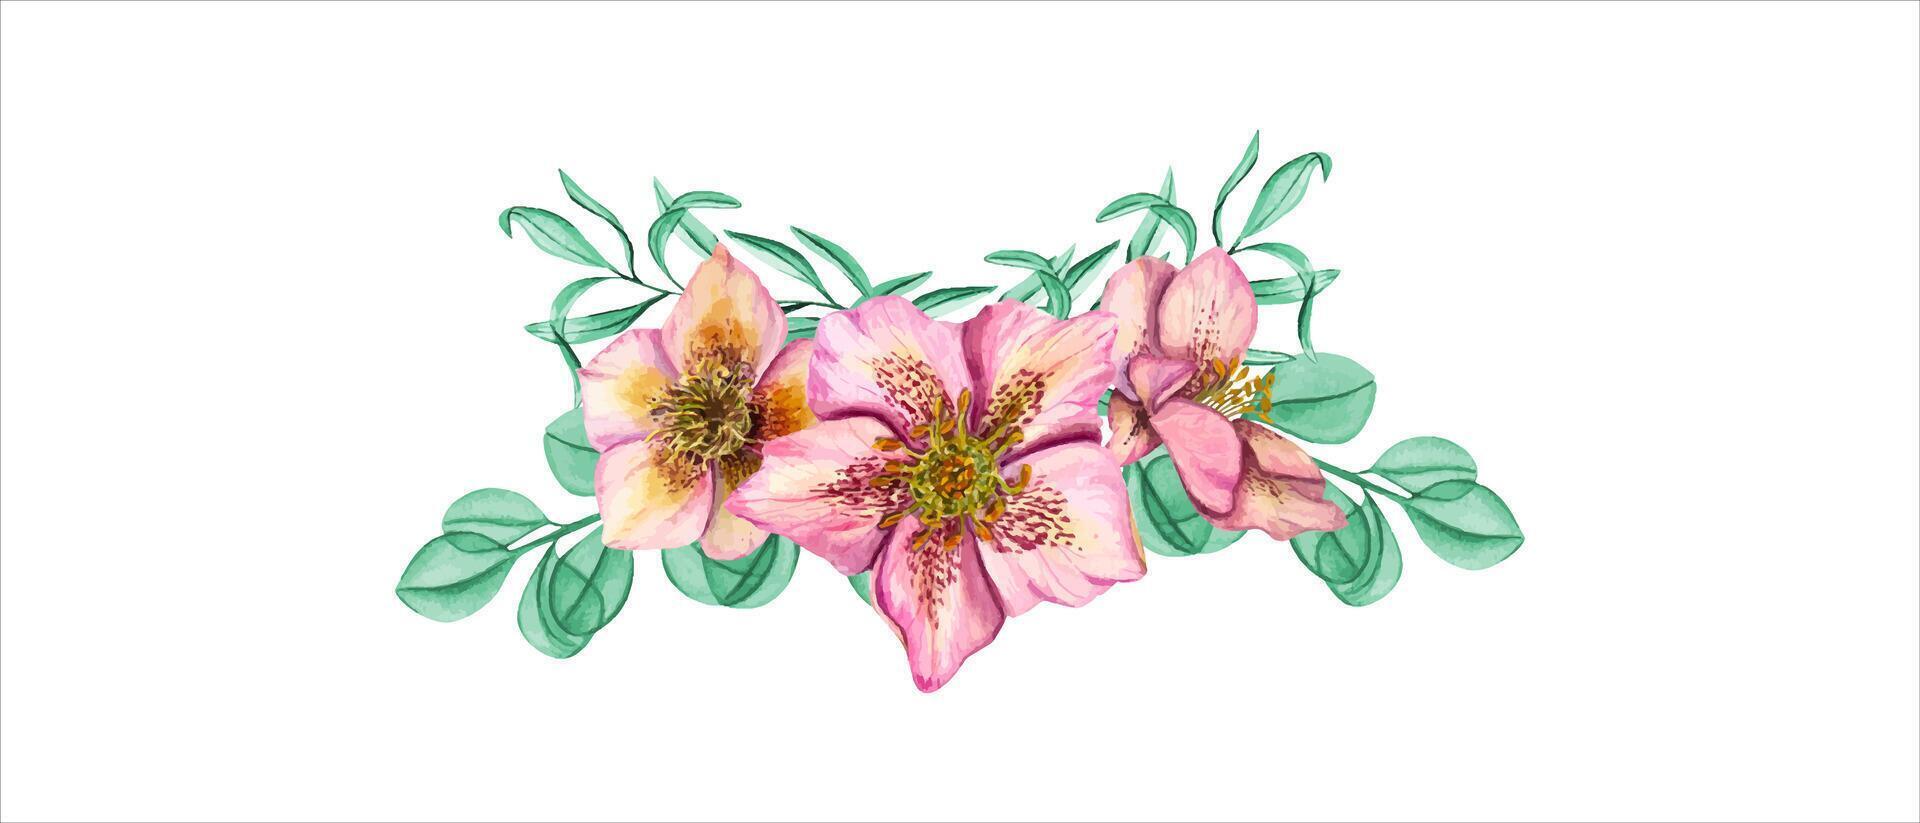 Pink Hellebores with mint herbs. Spring plants. Three Helleborus flower heads with eucalyptus branches. Watercolor illustration. For wedding invitation, birthday cards, textile design, prints vector